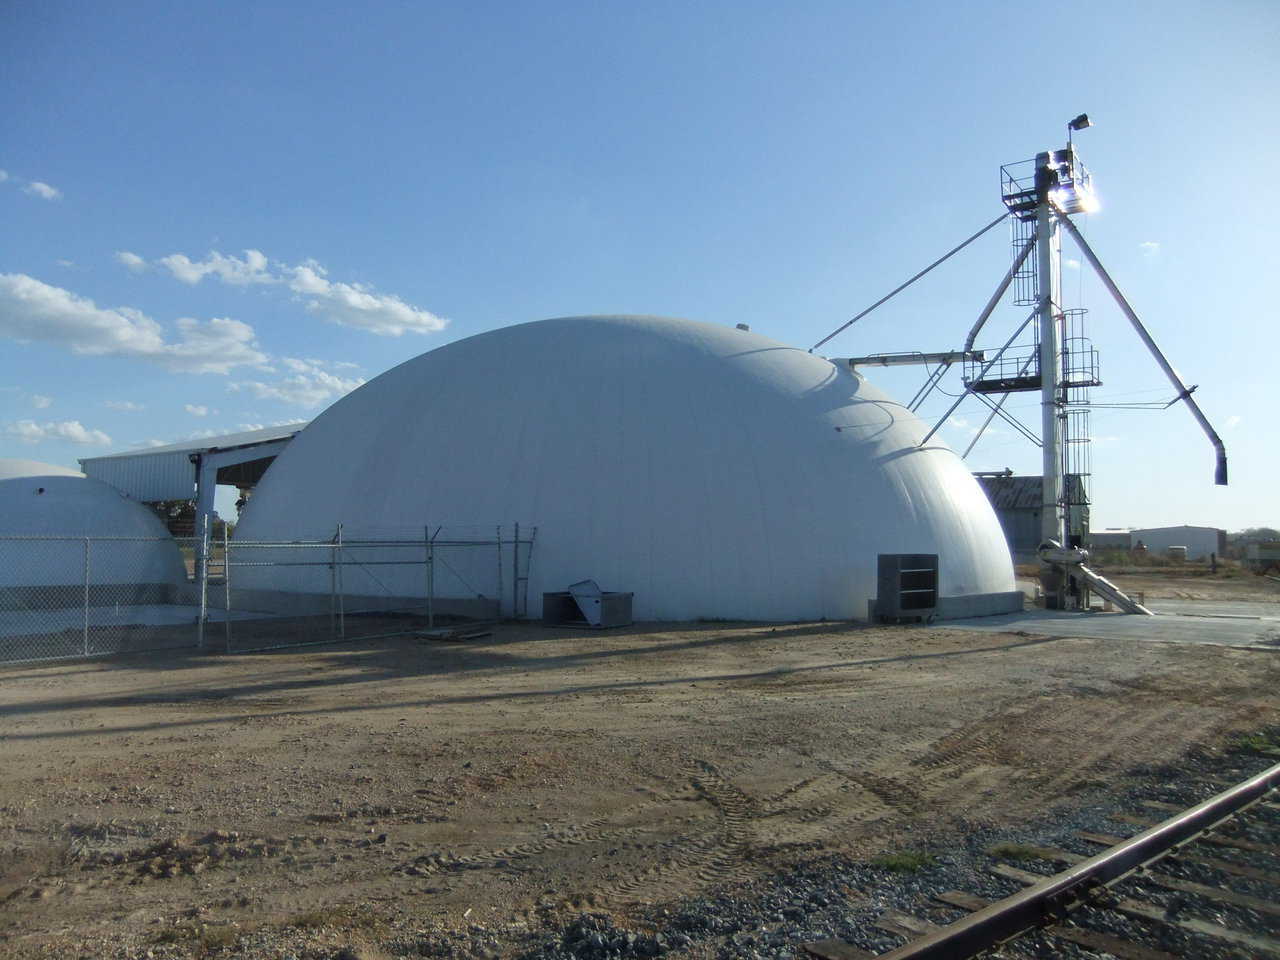 A view of the back — Shown here is the completed facility from the rear. You can see the unloading can be done from the rail or trucks. Product can go back into trucks or into the building. To the left you can see the small dome and the canopy over the mixing facility.